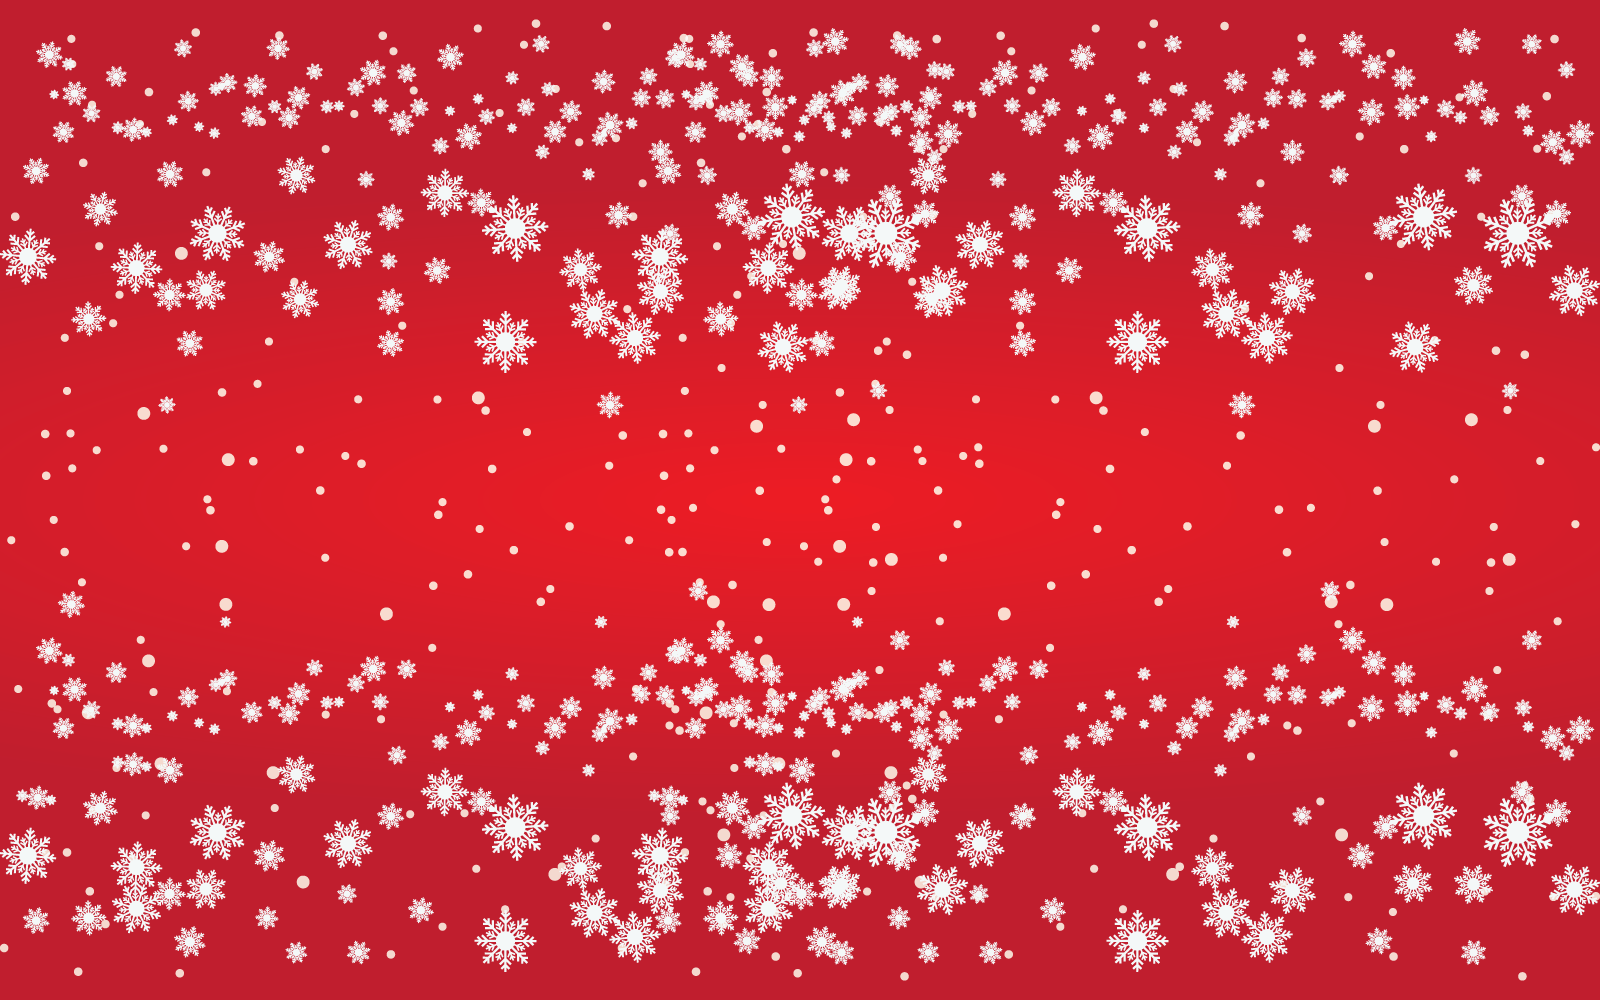 Snowflakes background snowfall vector template